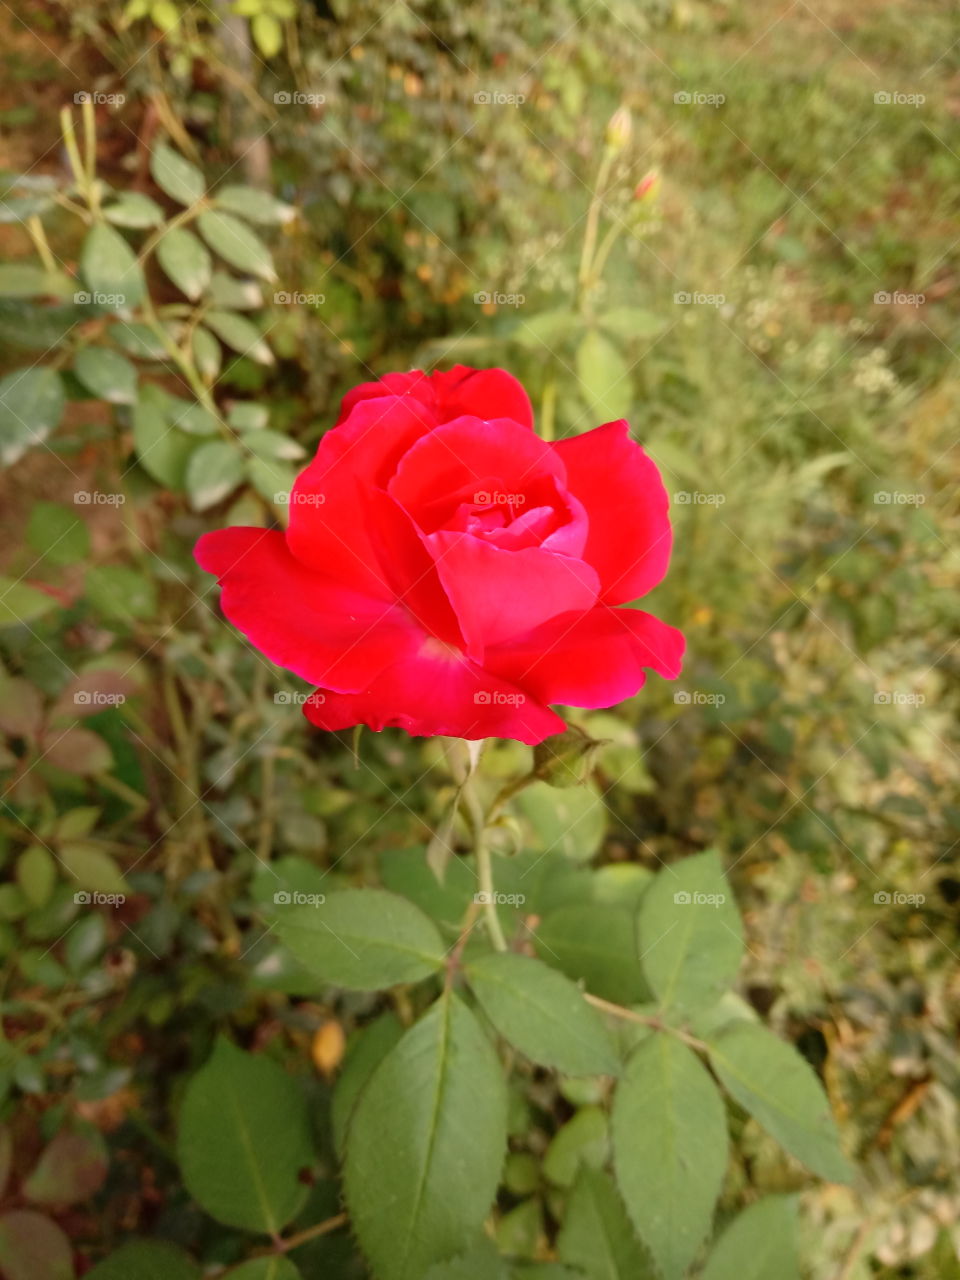 beautiful rose capture by vj